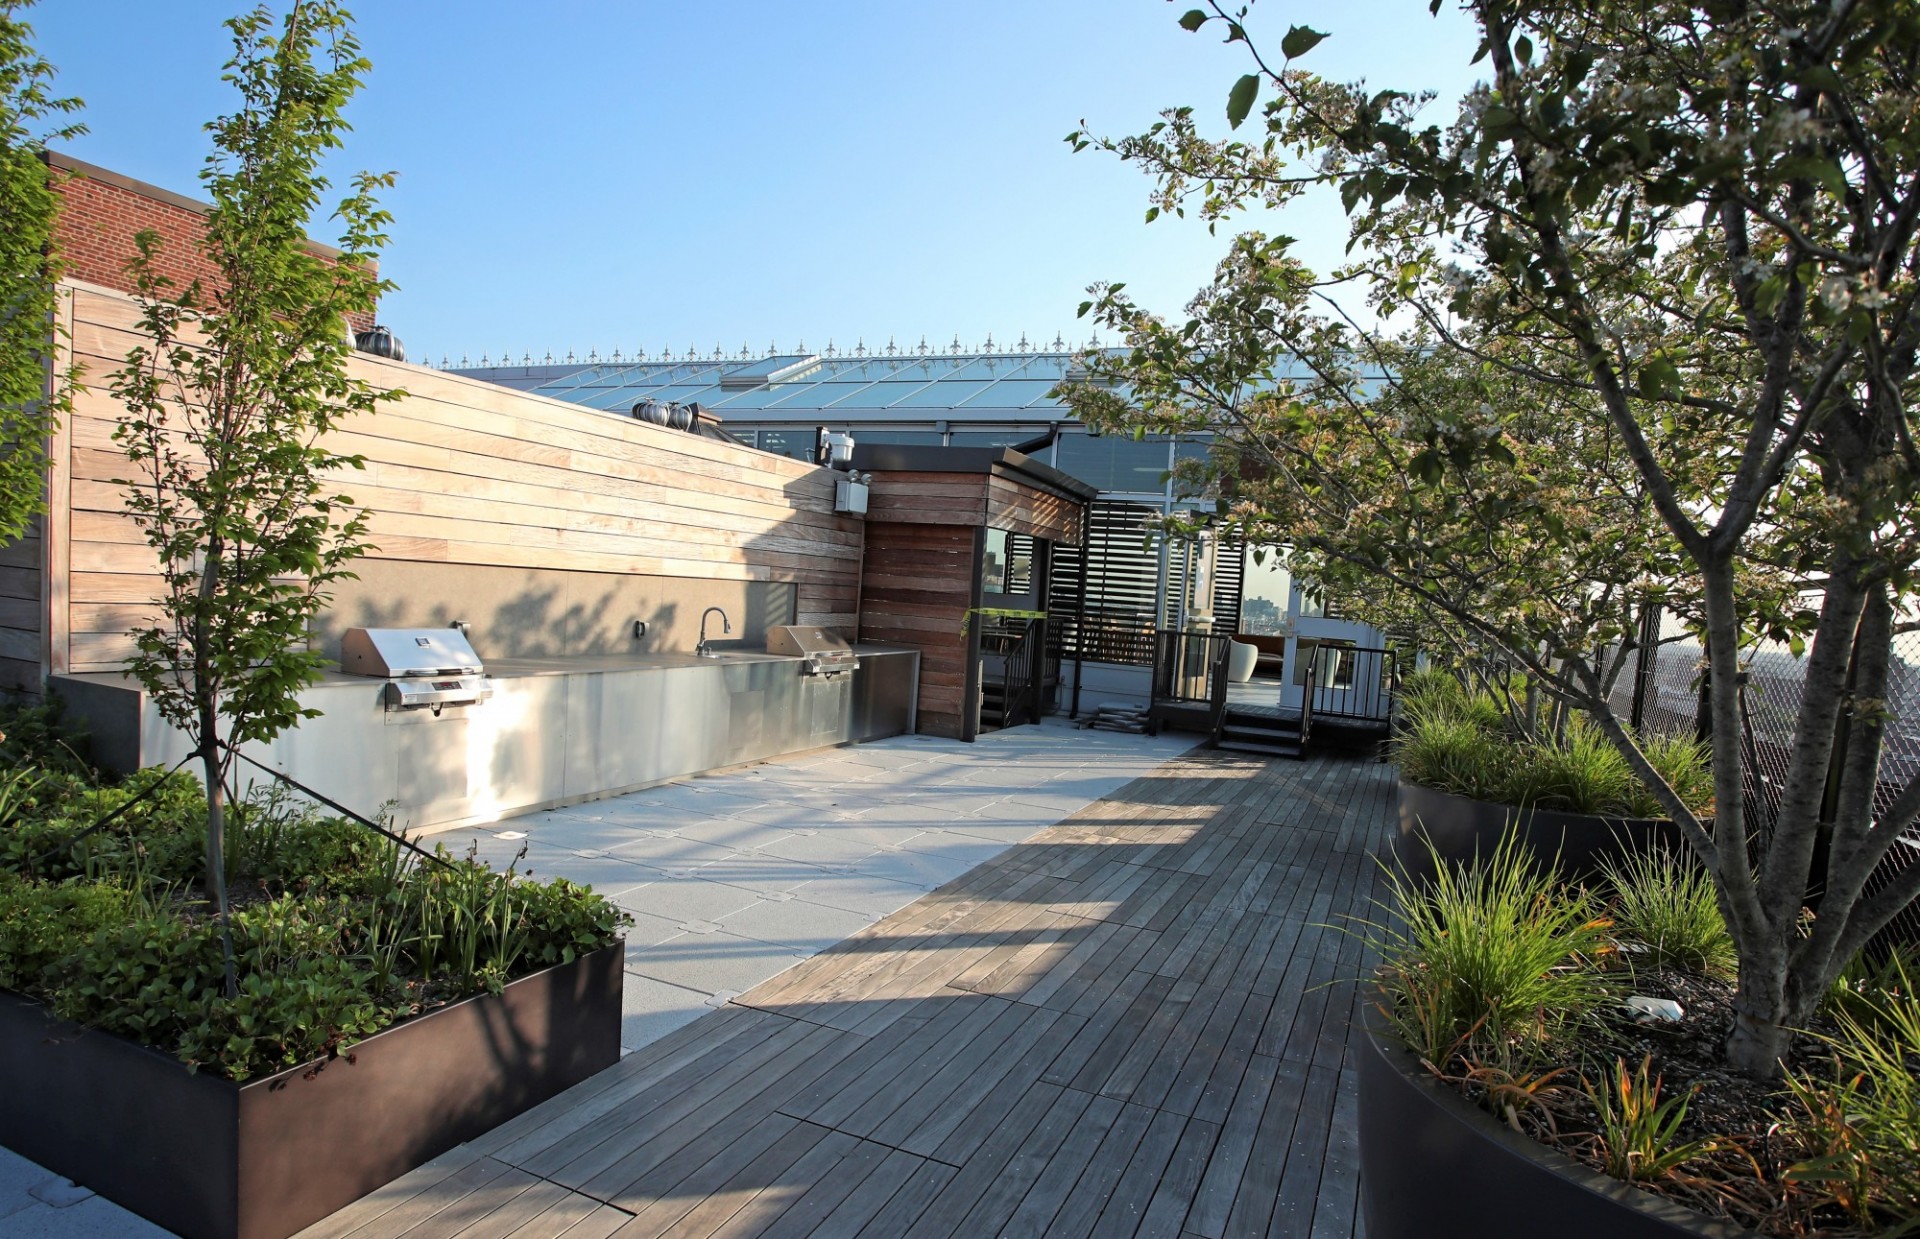 400 West 119th Street Roof Deck